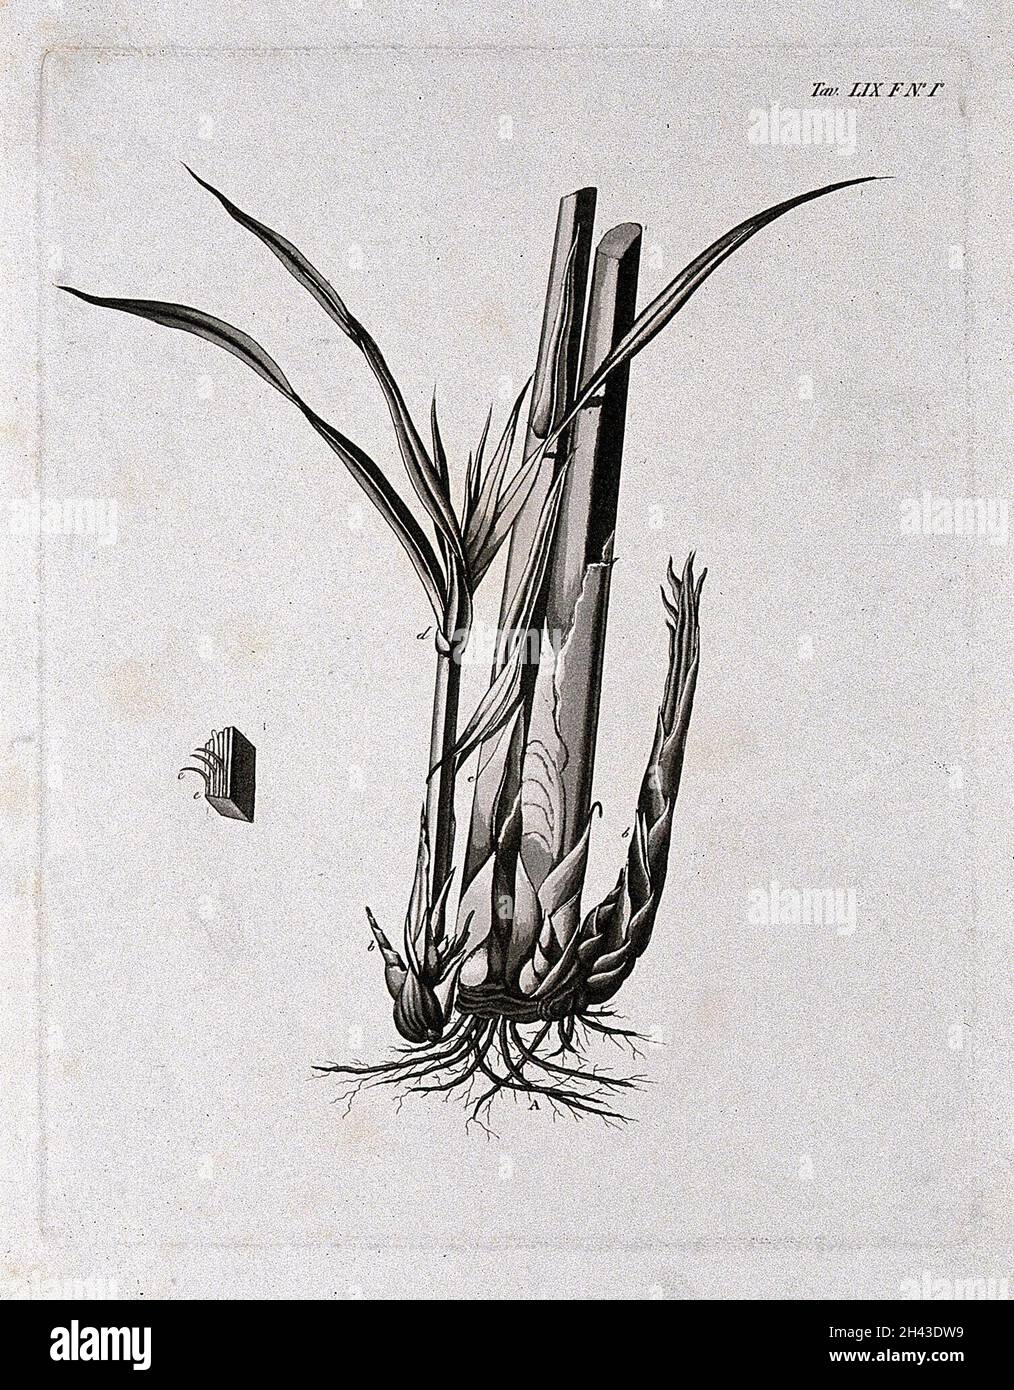 A plant (Cyperus species): rootstock with young shoot. Aquatint. Stock Photo